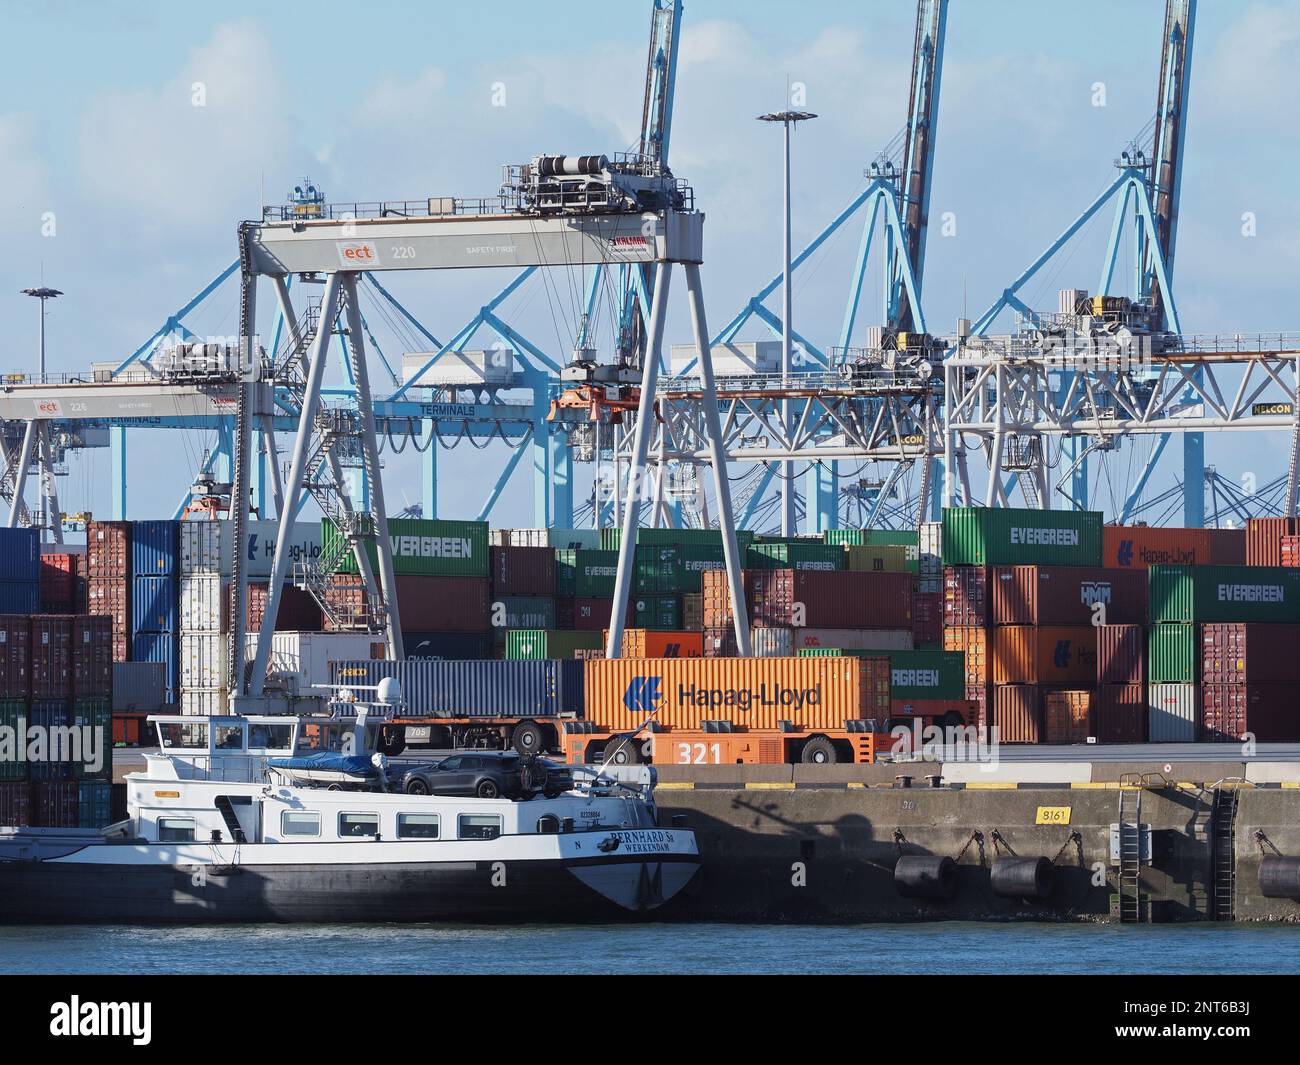 The modern ECT container terminal in the Port of Rotterdam, the Netherlands, is using unmanned cranes and driverless vehicles. Stock Photo